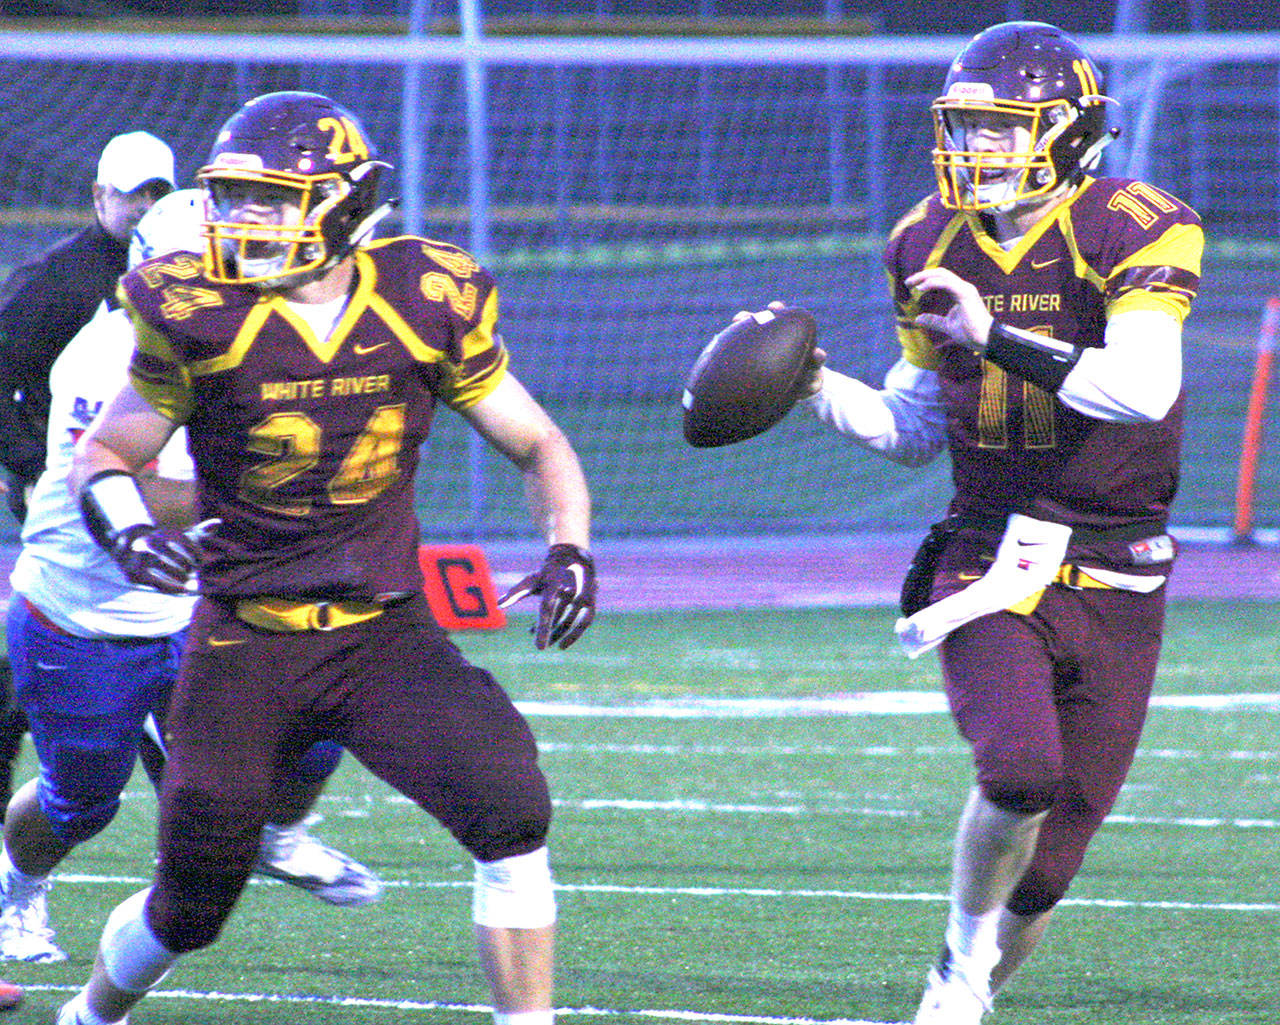 White River quarterback TJ Strochein looks for a receiver during Friday’s victory while Jack Ervien looks to provide some protection. KEVIN HANSON PHOTO